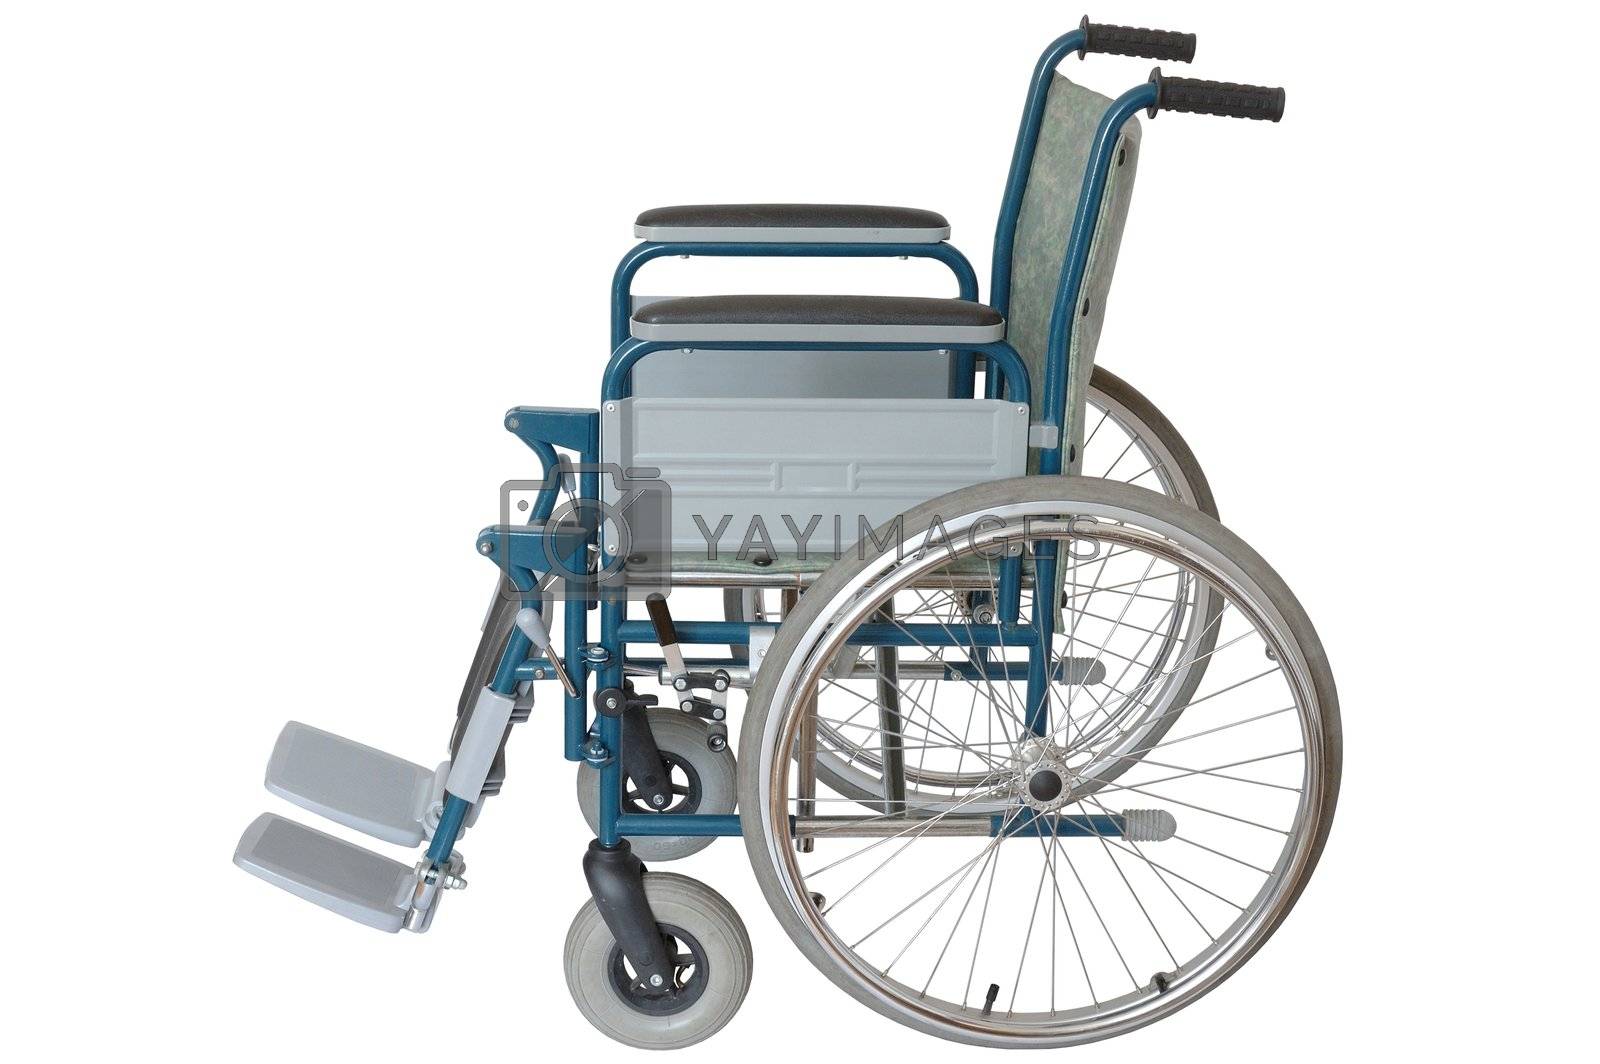 Royalty free image of Wheelchair by ajt